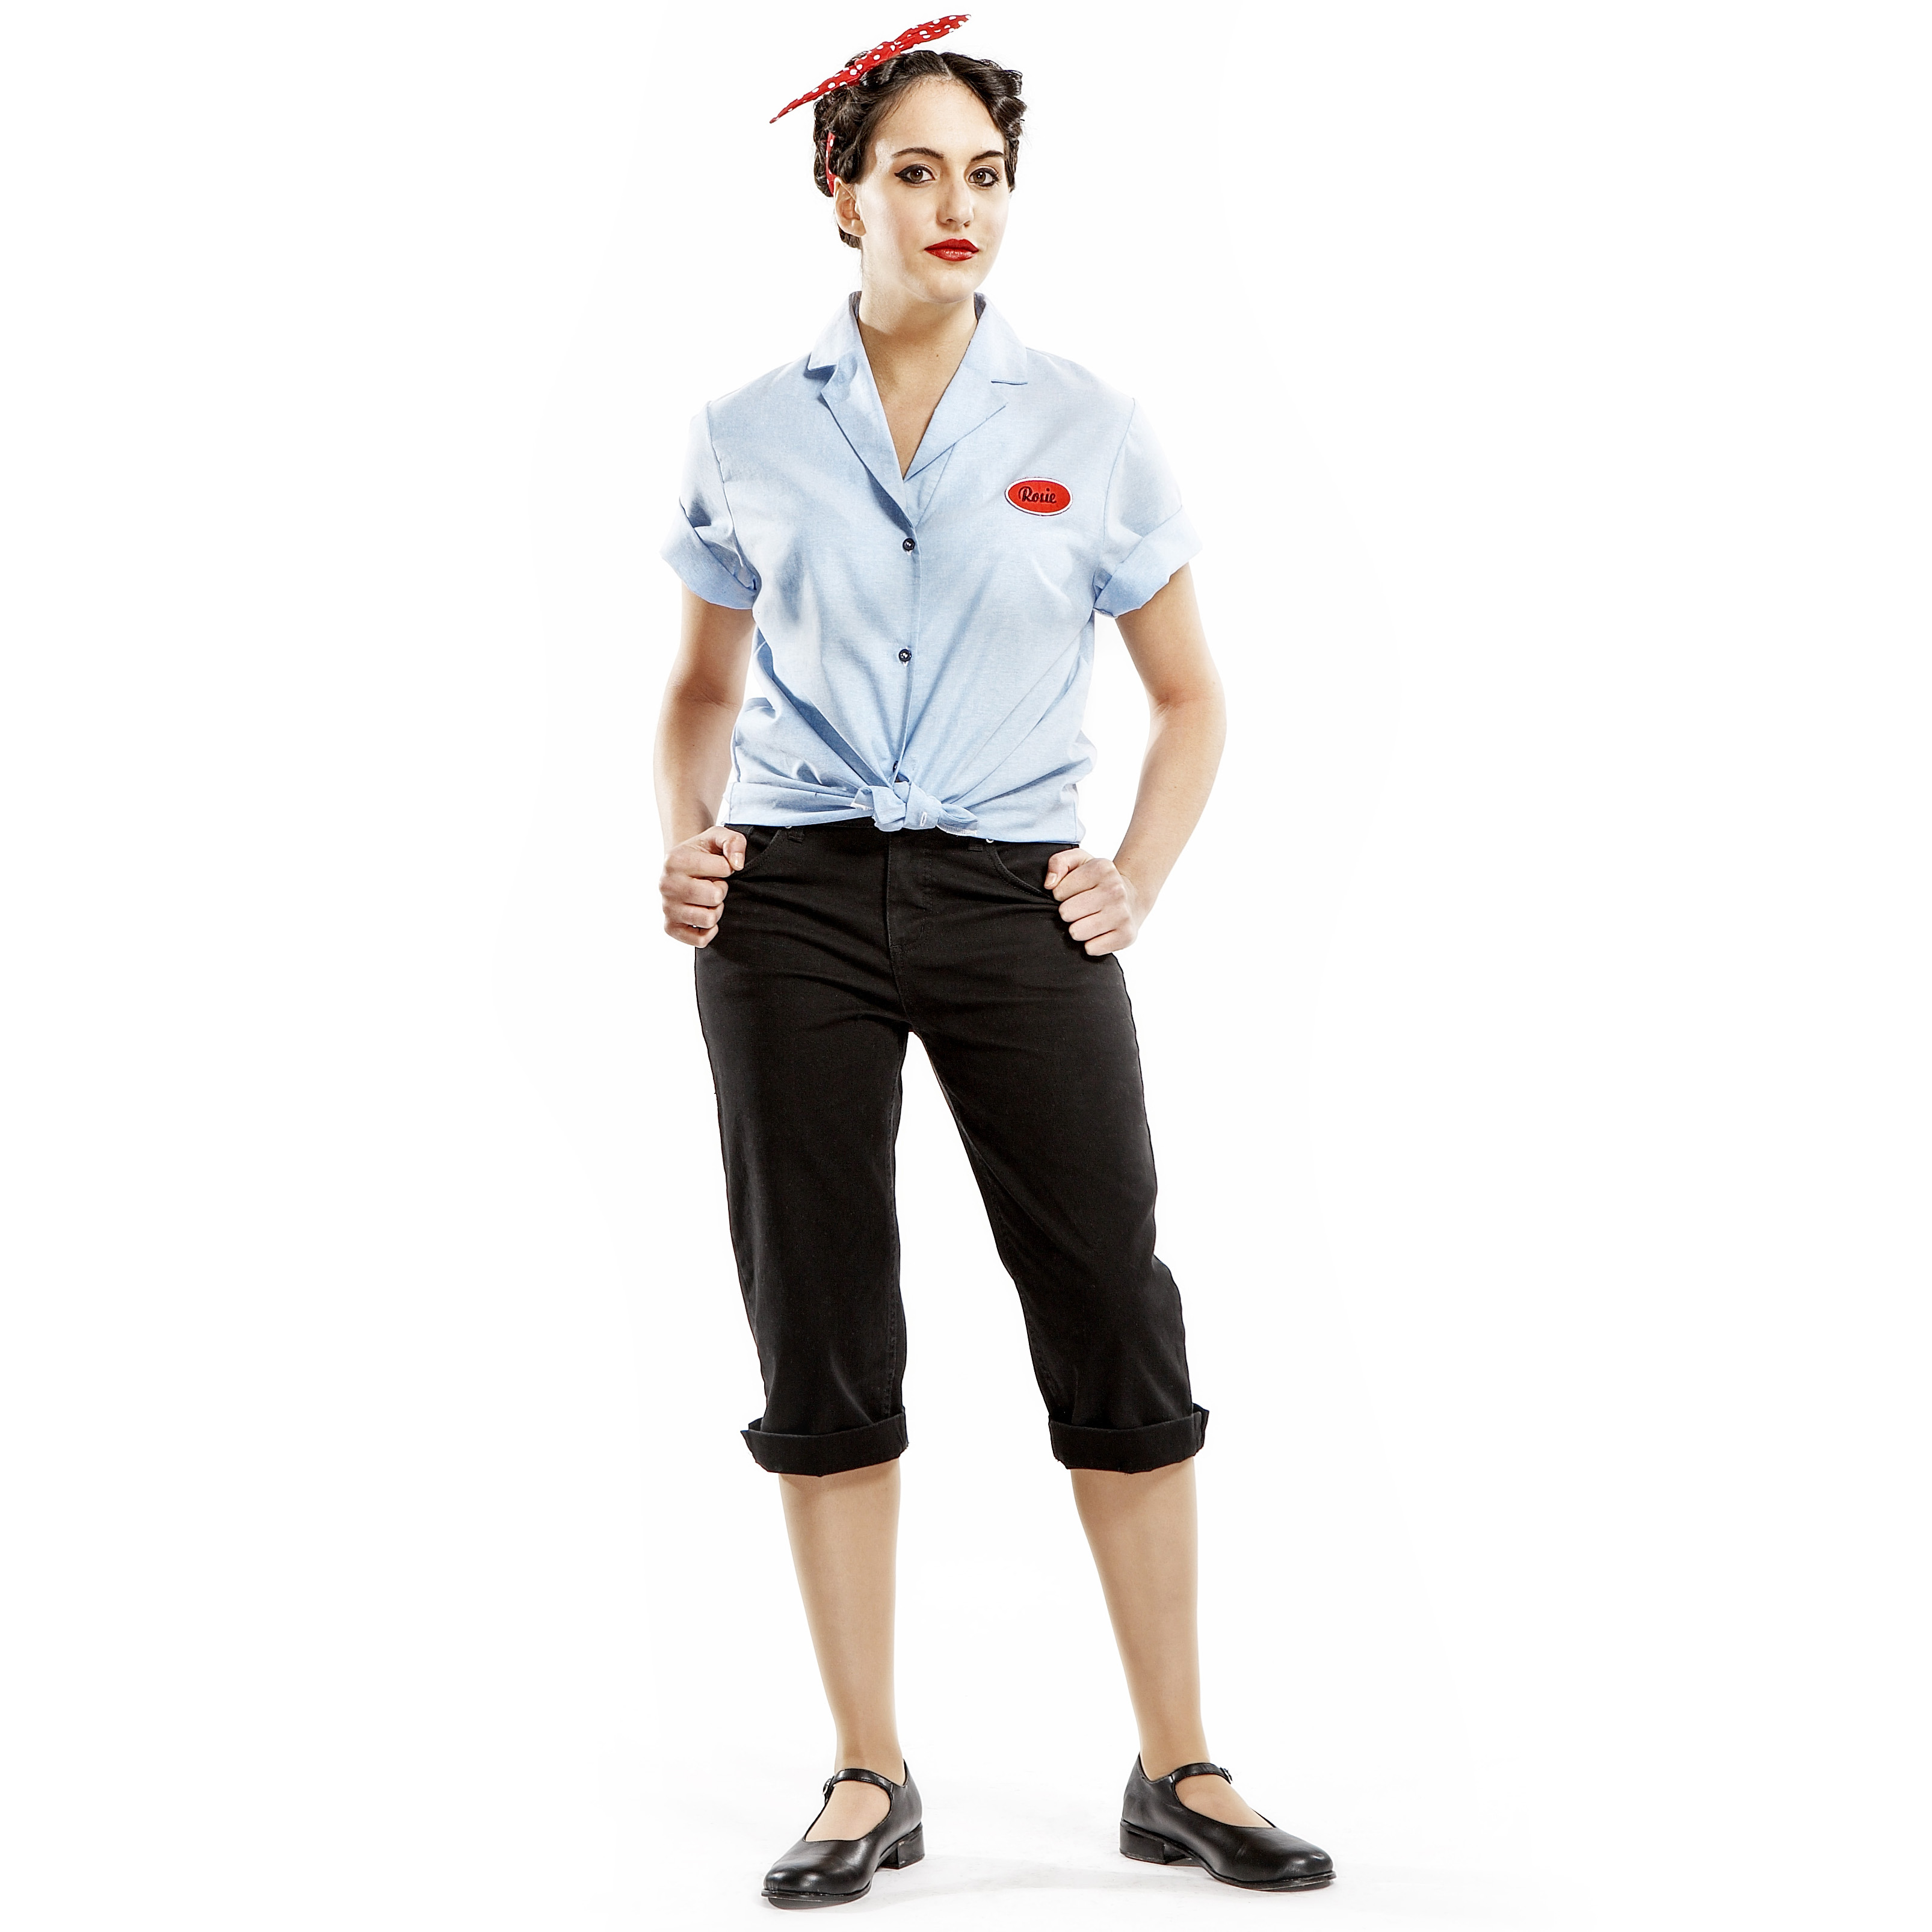 AMC Women's Rosie the Riveter Adult Costume - One-Size (8-14)